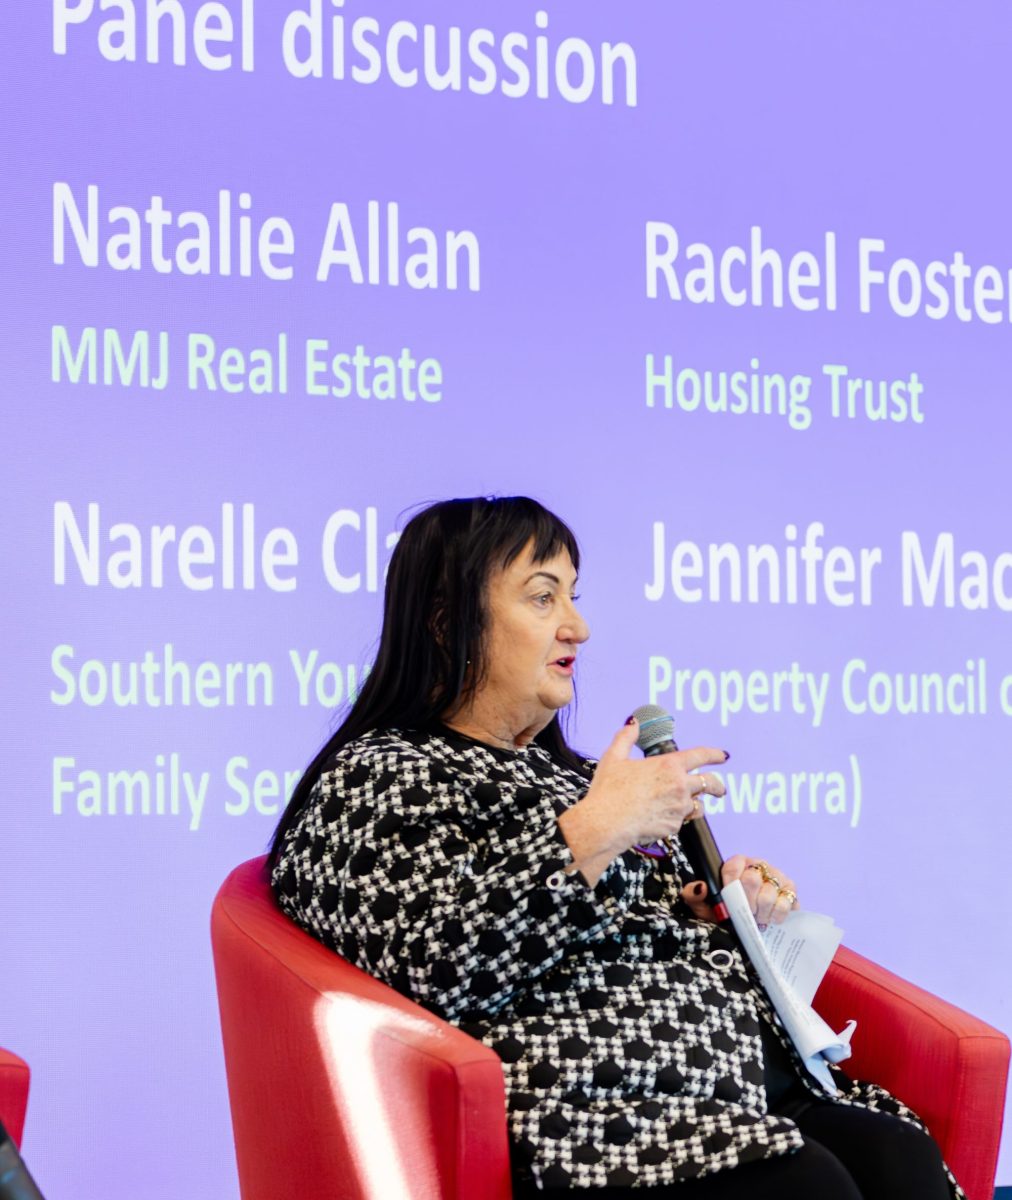 Narelle Clay speaking during the panel discussion.